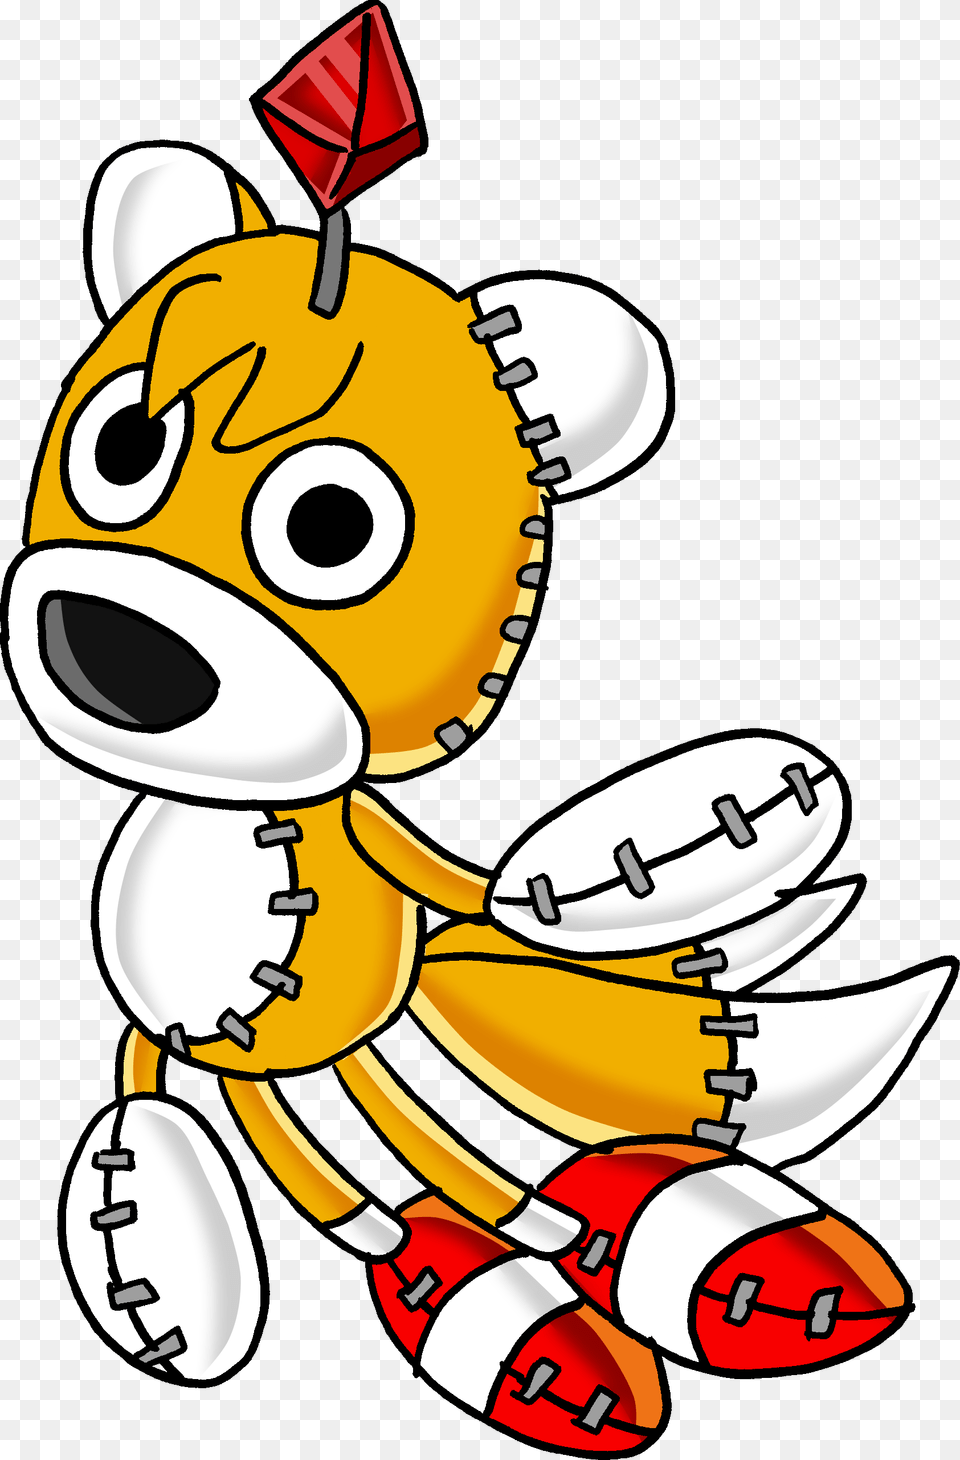 Tails Doll Png Image